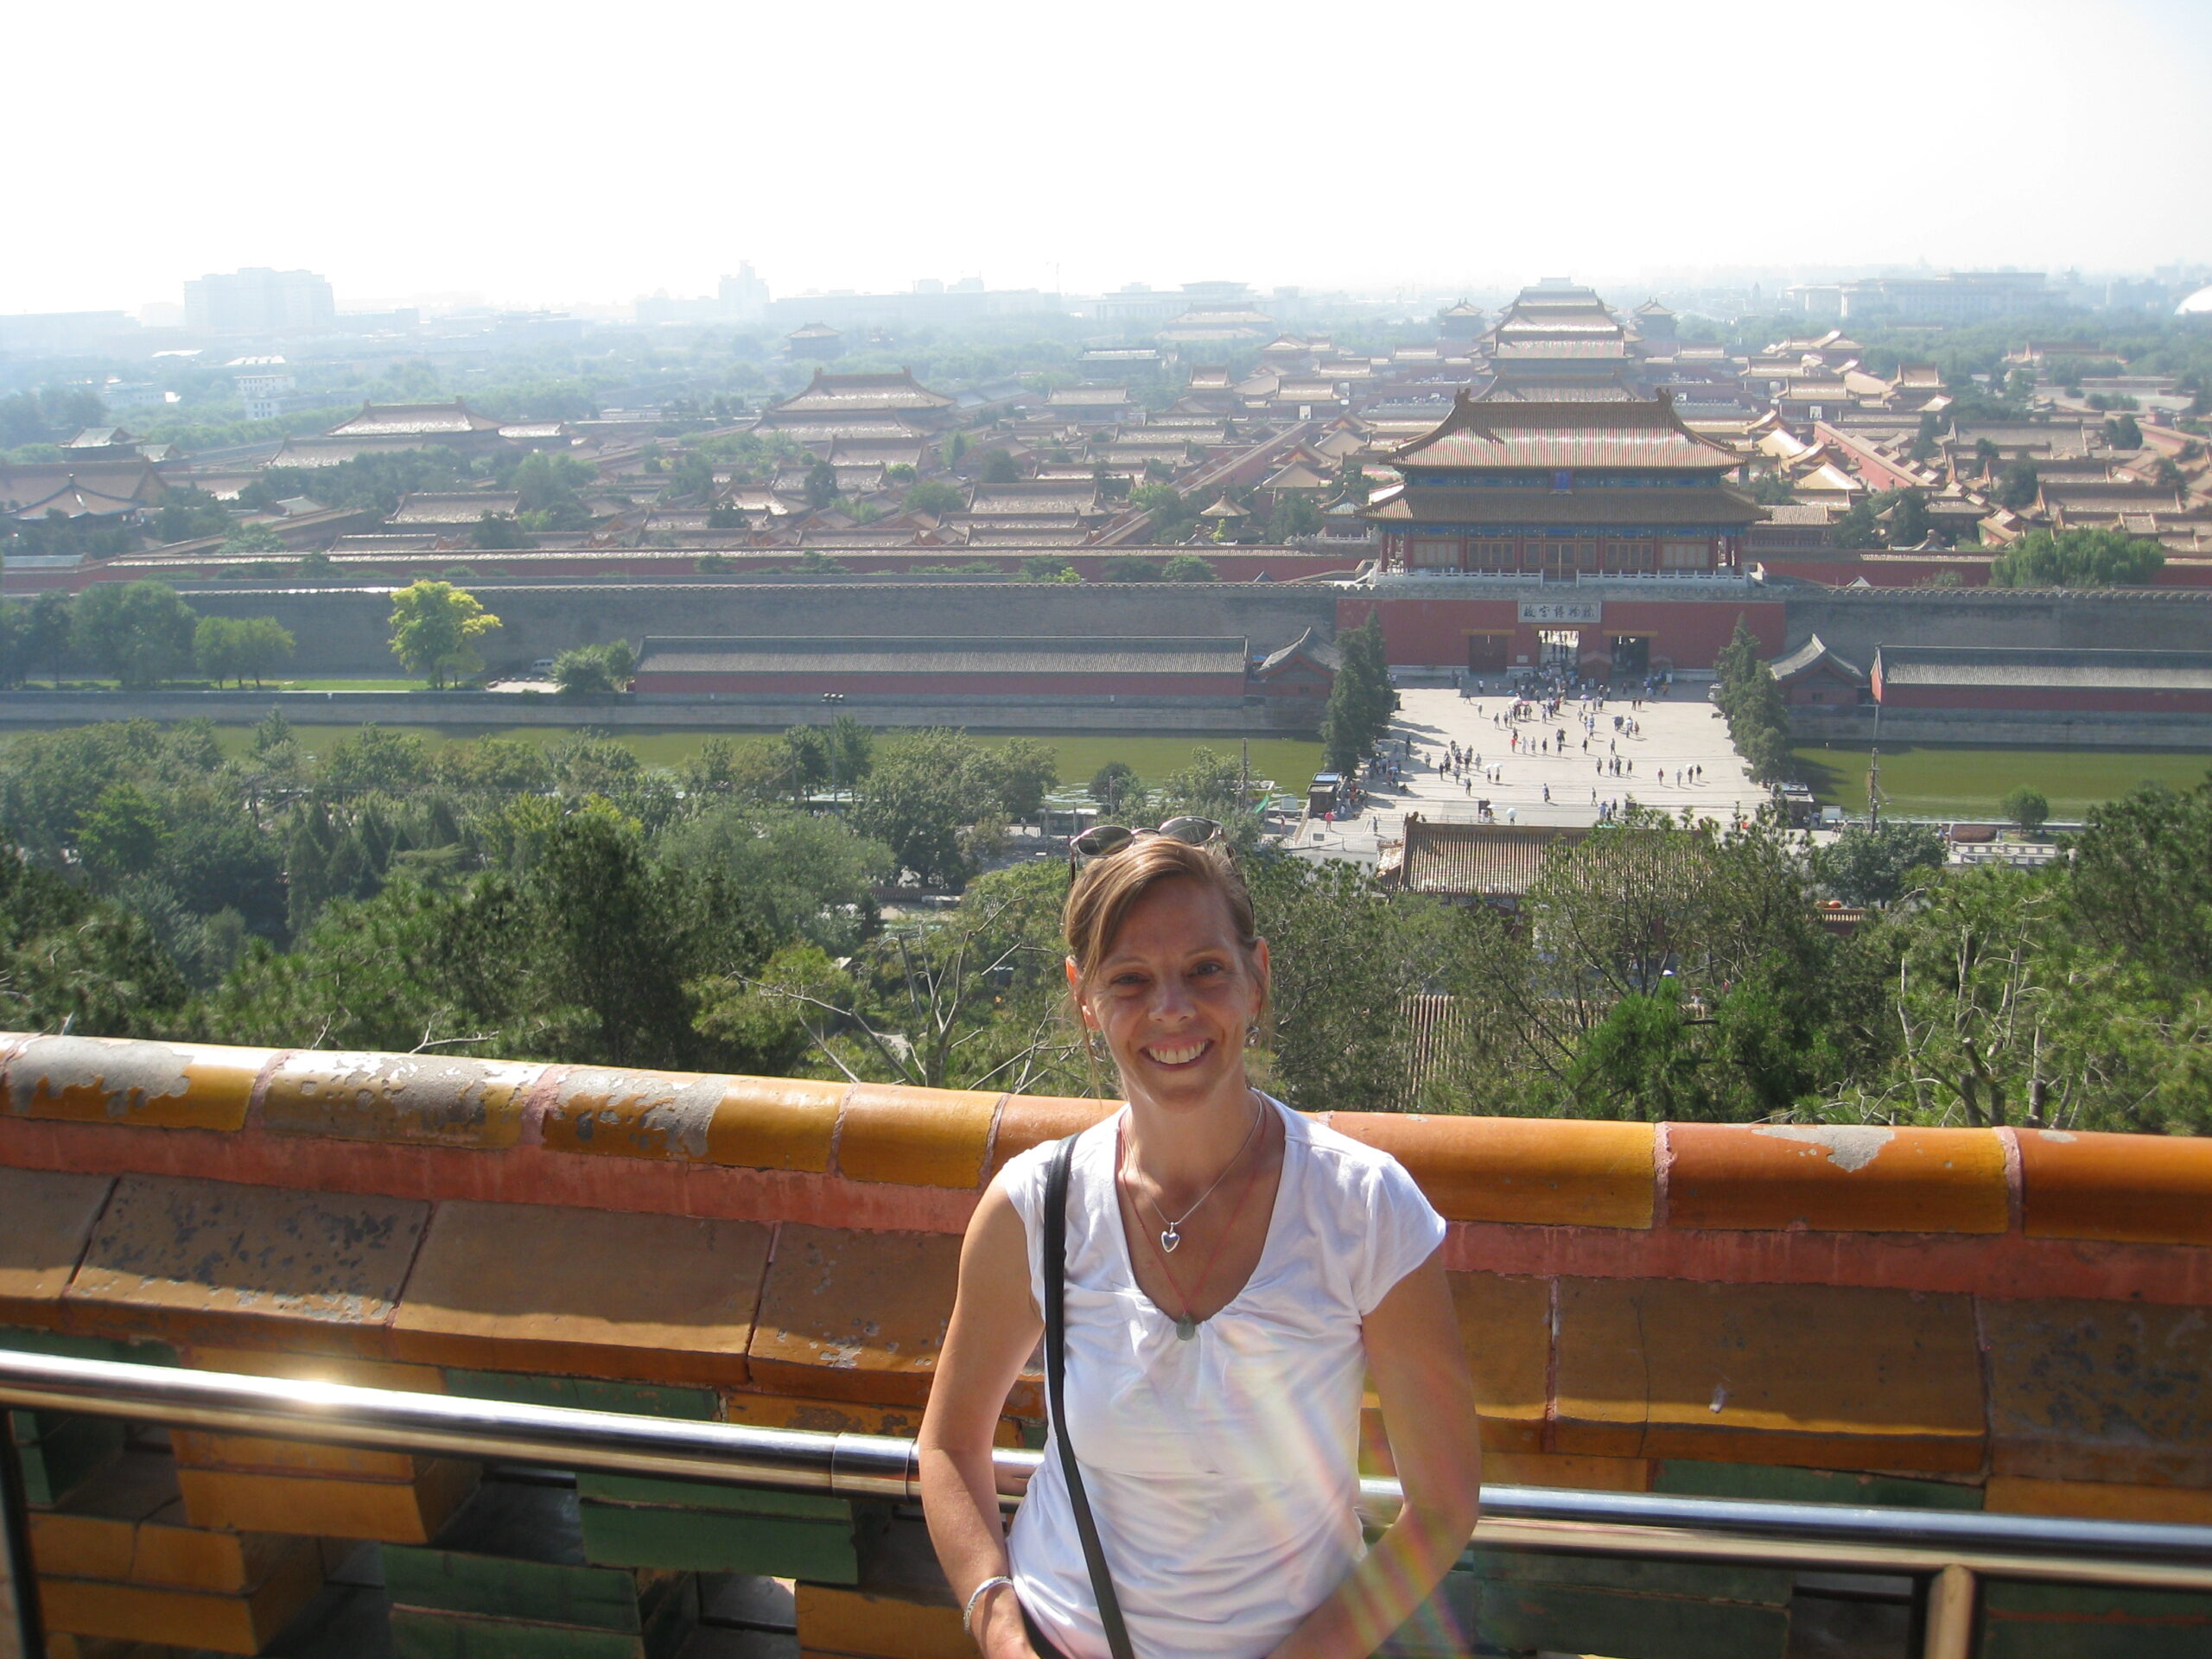 Experiences from the Middle Kingdom – Training Chinese nurses